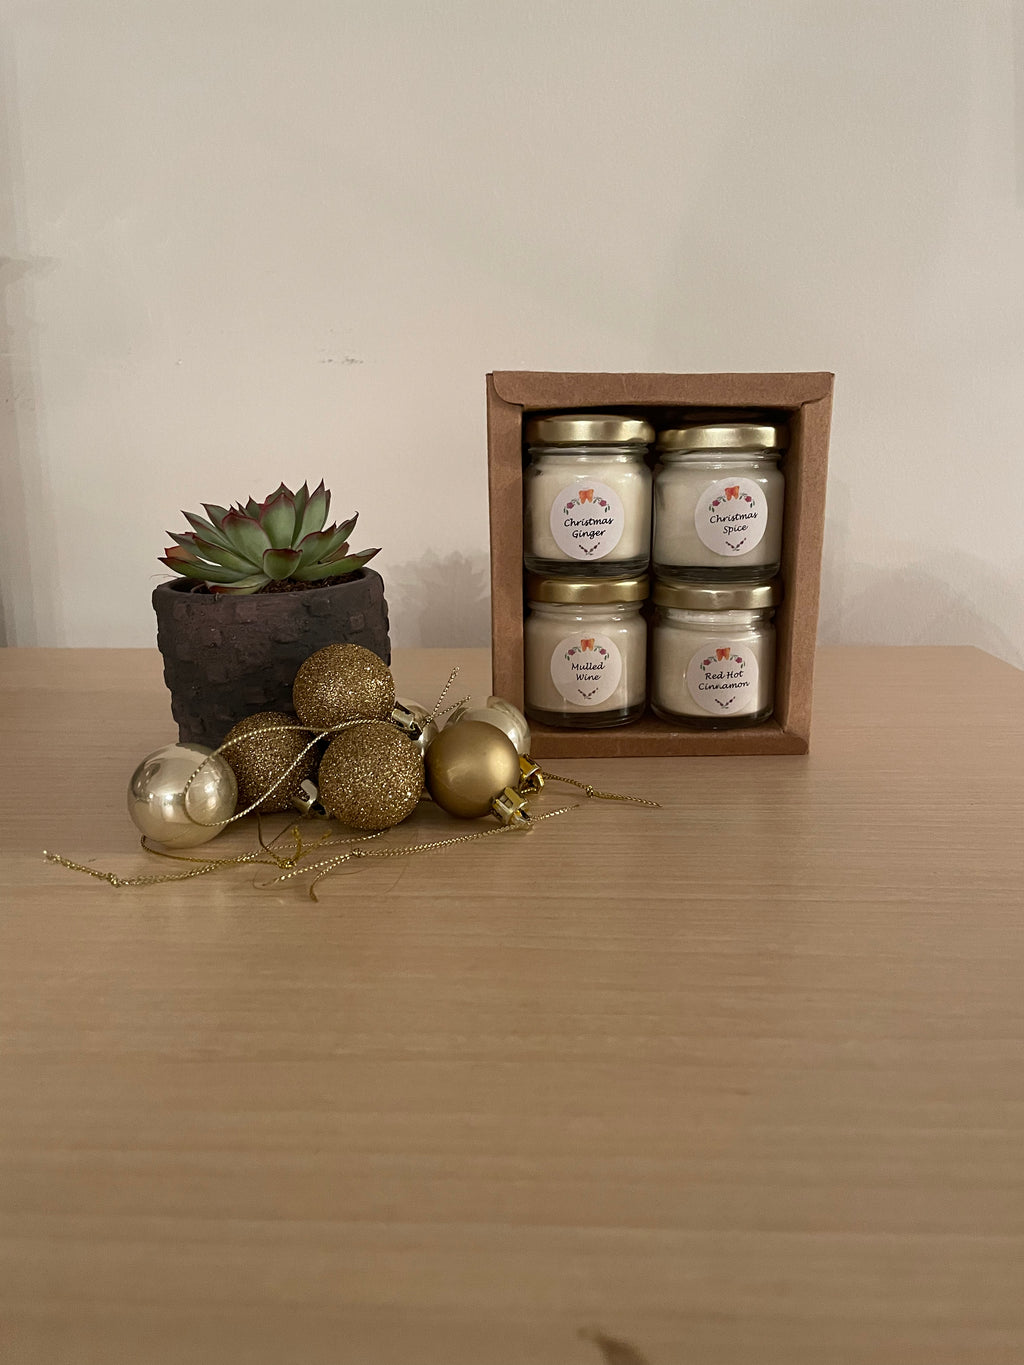 Christmas Scented 4 x Vegan Soy Wax Small Candles in Presentation Box